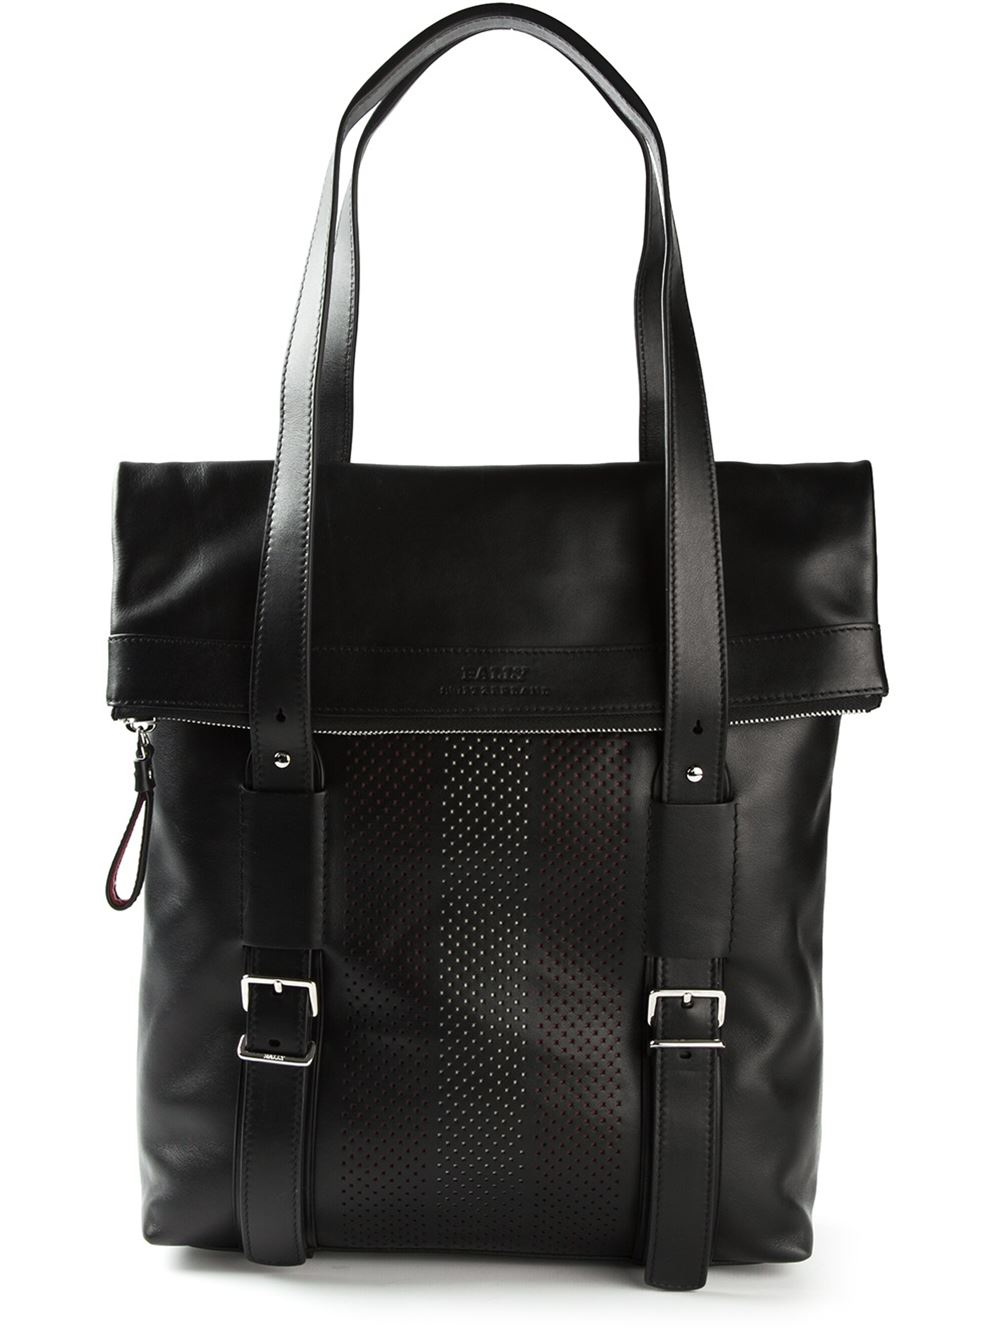 Black Leather Tote Bags | IQS Executive